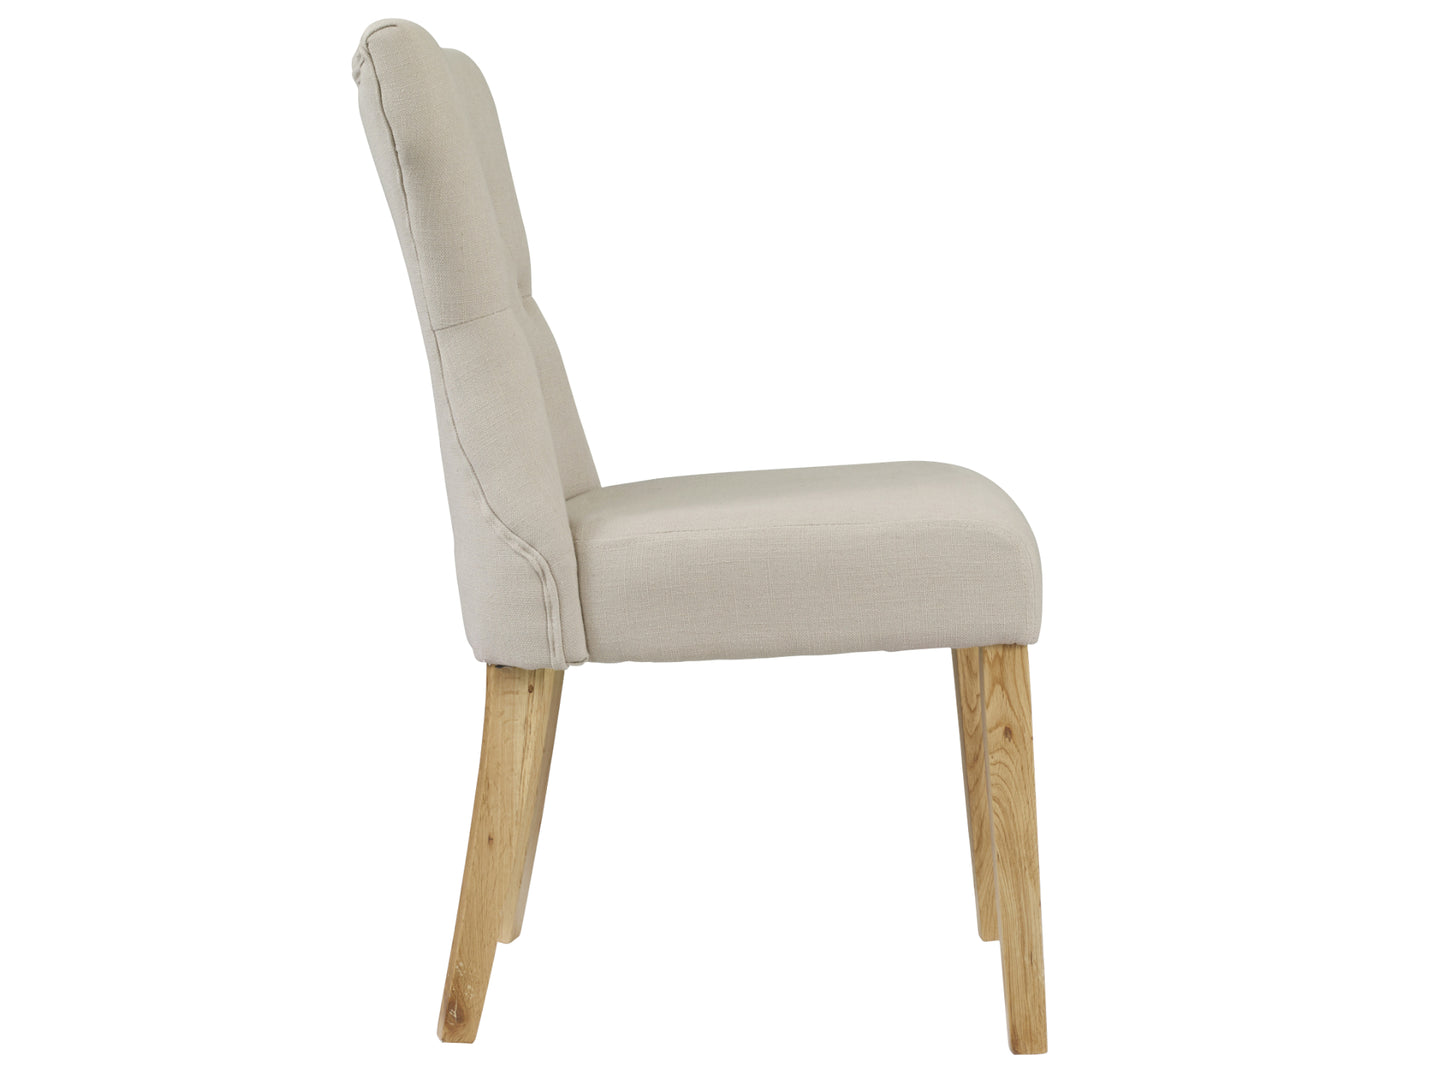 Naples Dining Chair in Beige (2 Pack)